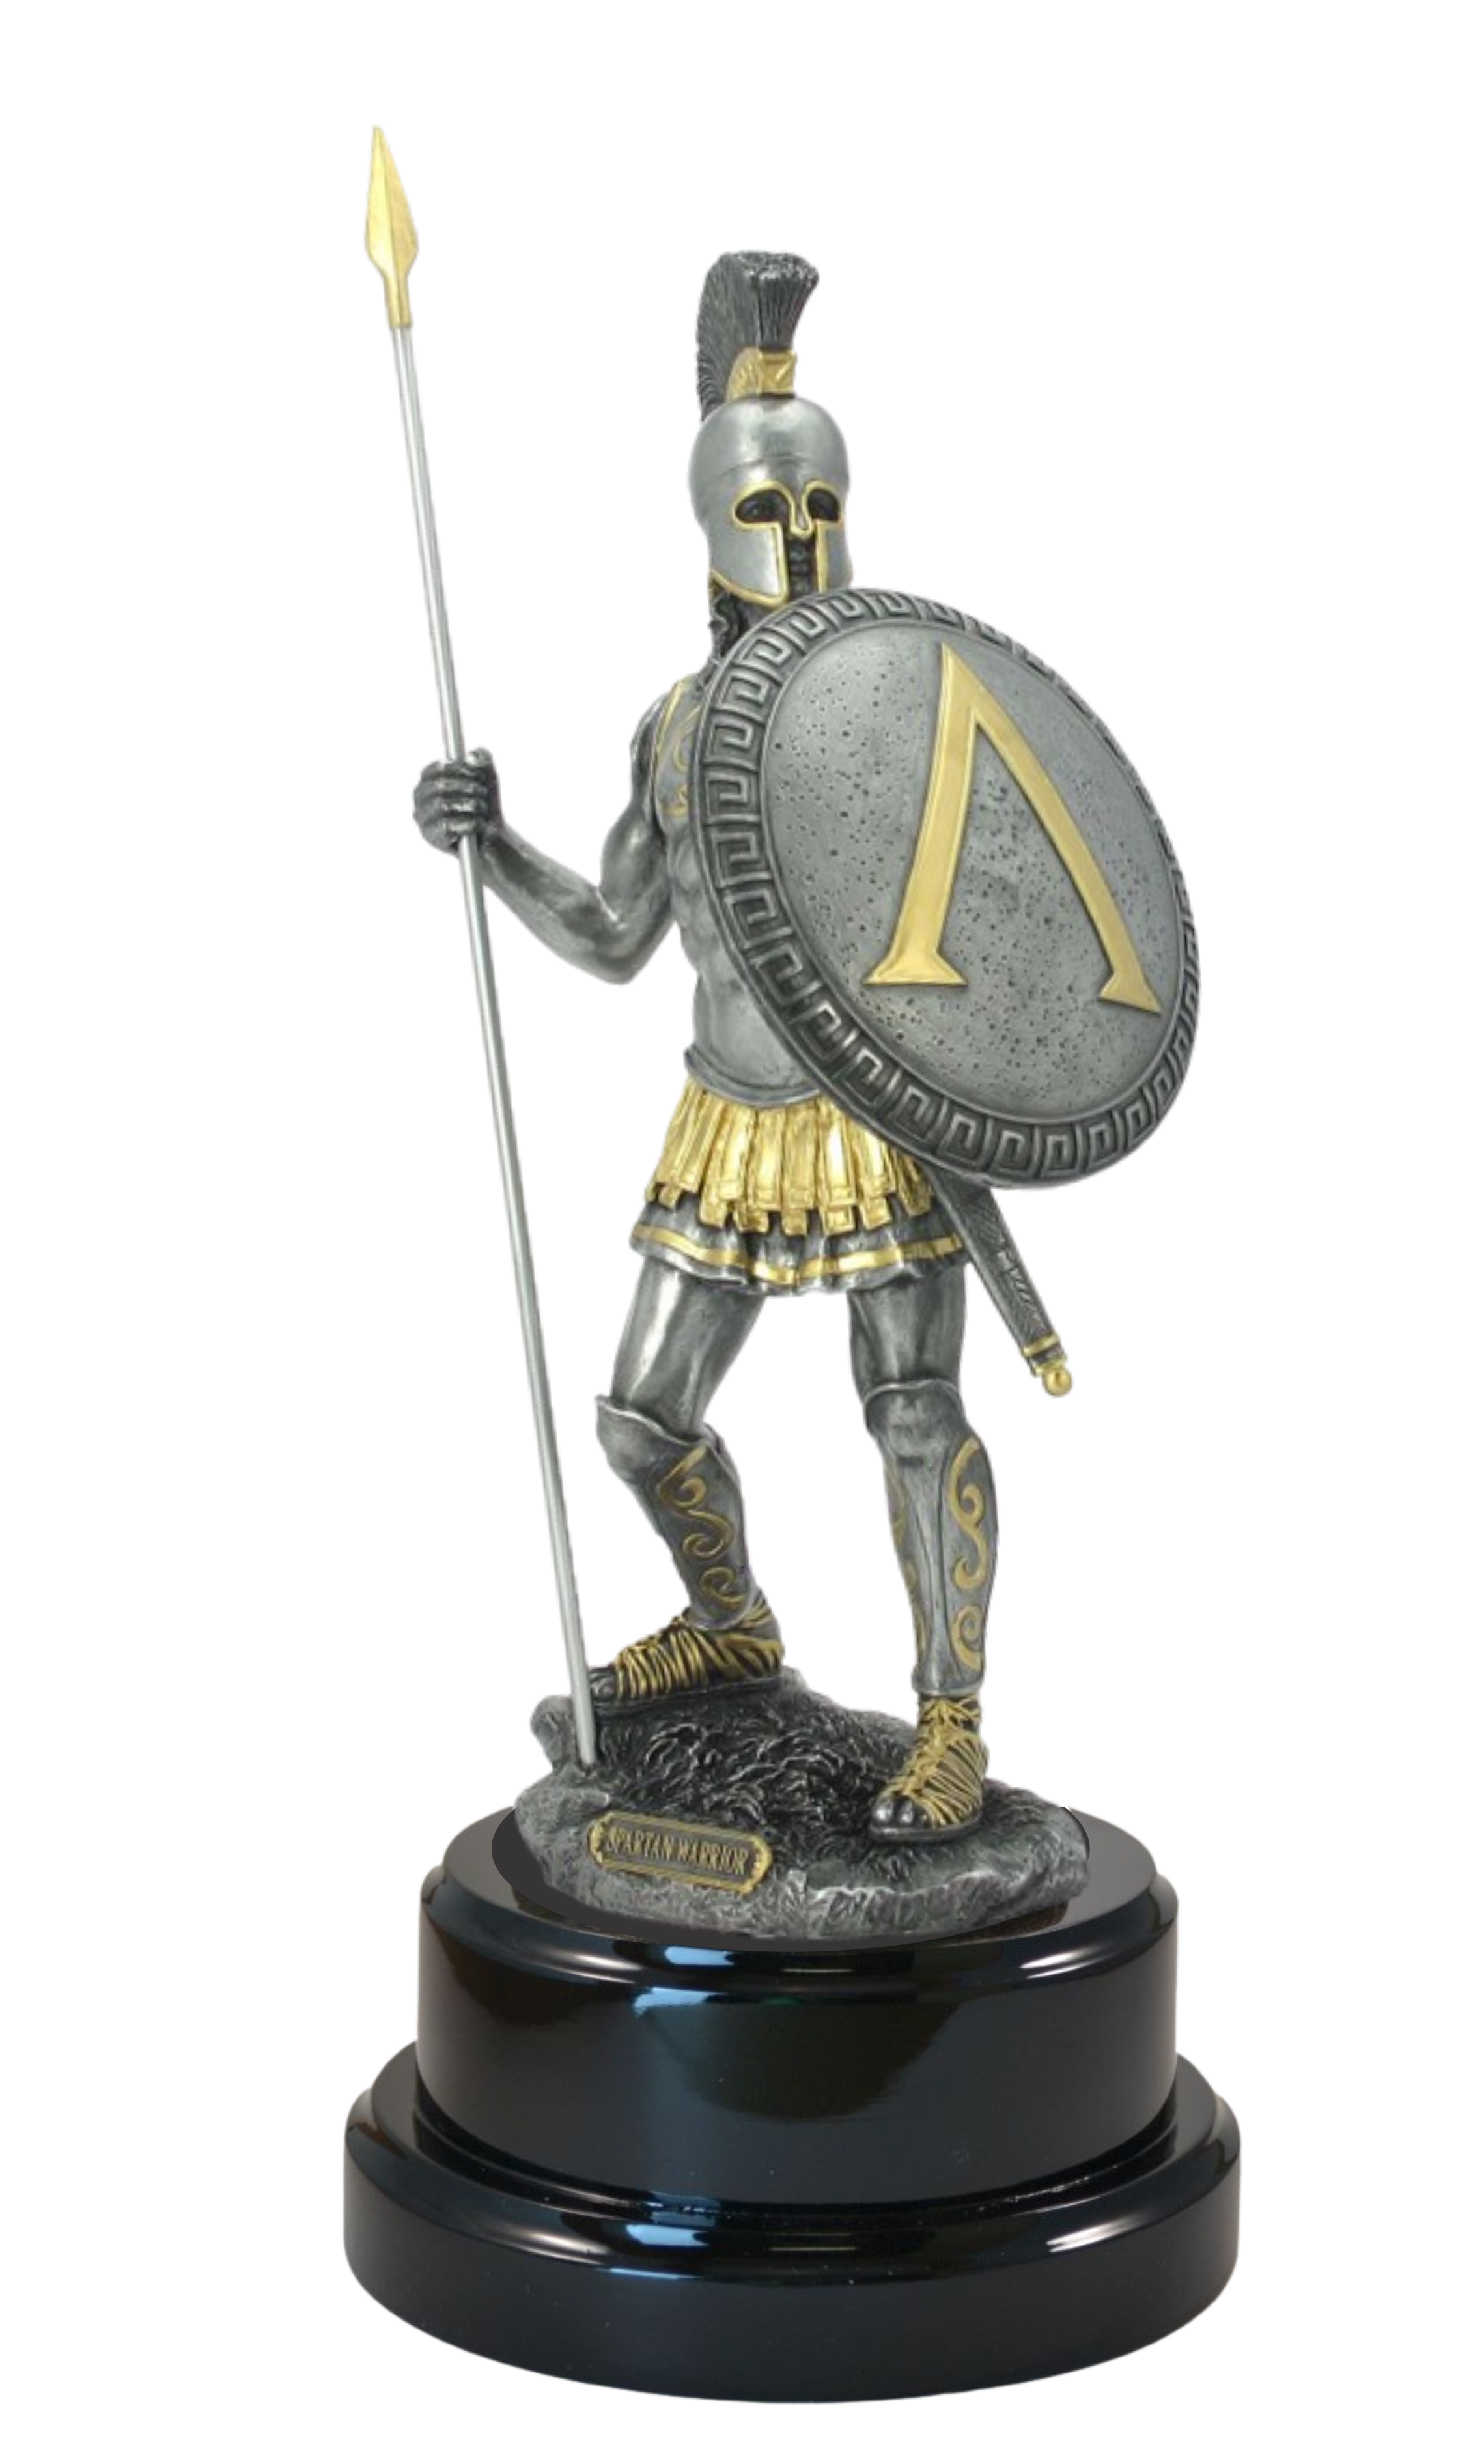 Spartan Warrior with Spear and Hoplite Shield